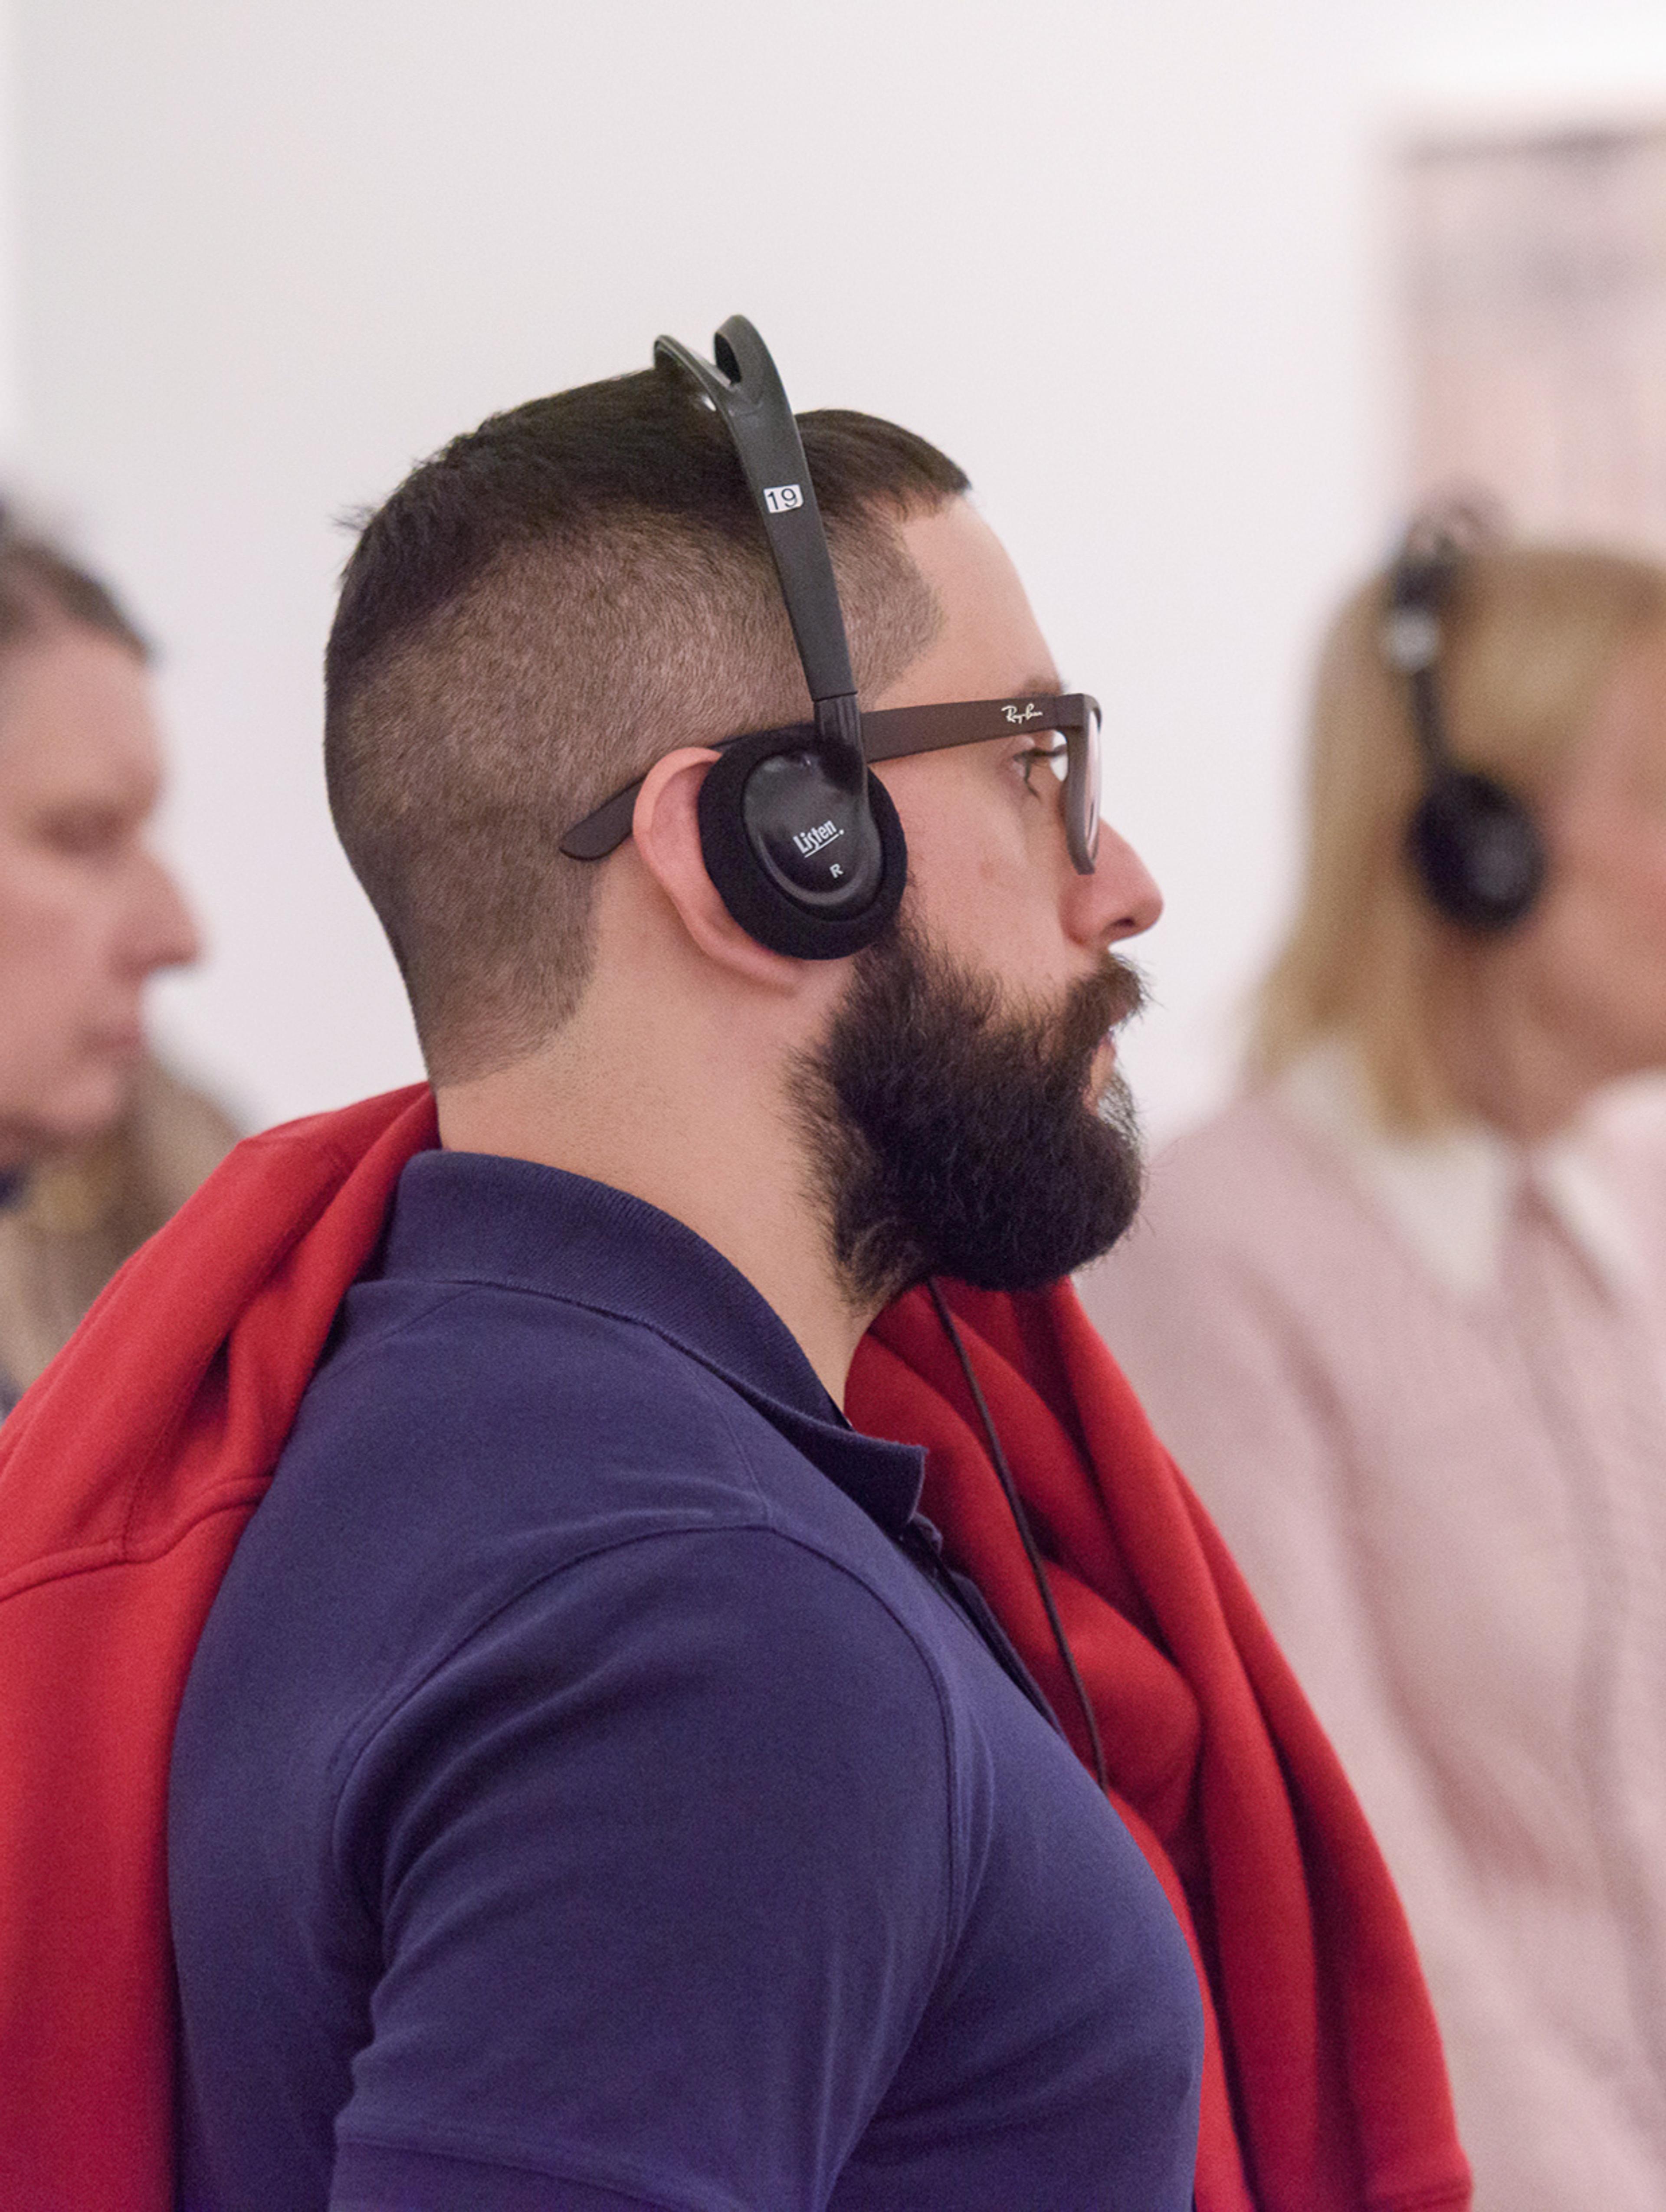 A young man with a beard wears over the ear headphones.